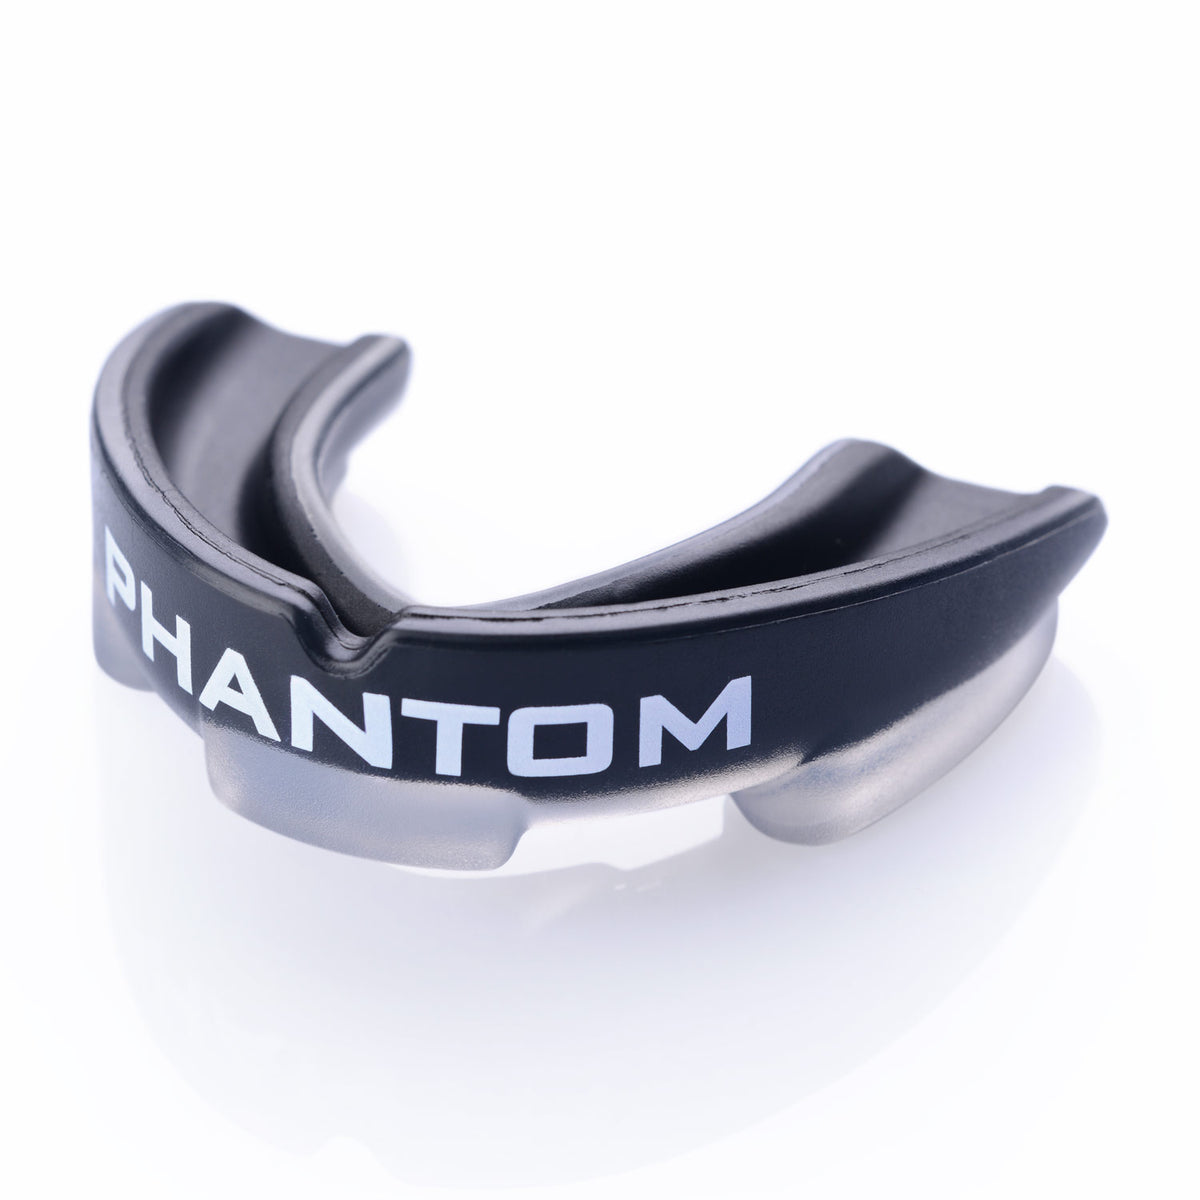 Phantom Impact mouthguard in black for martial arts